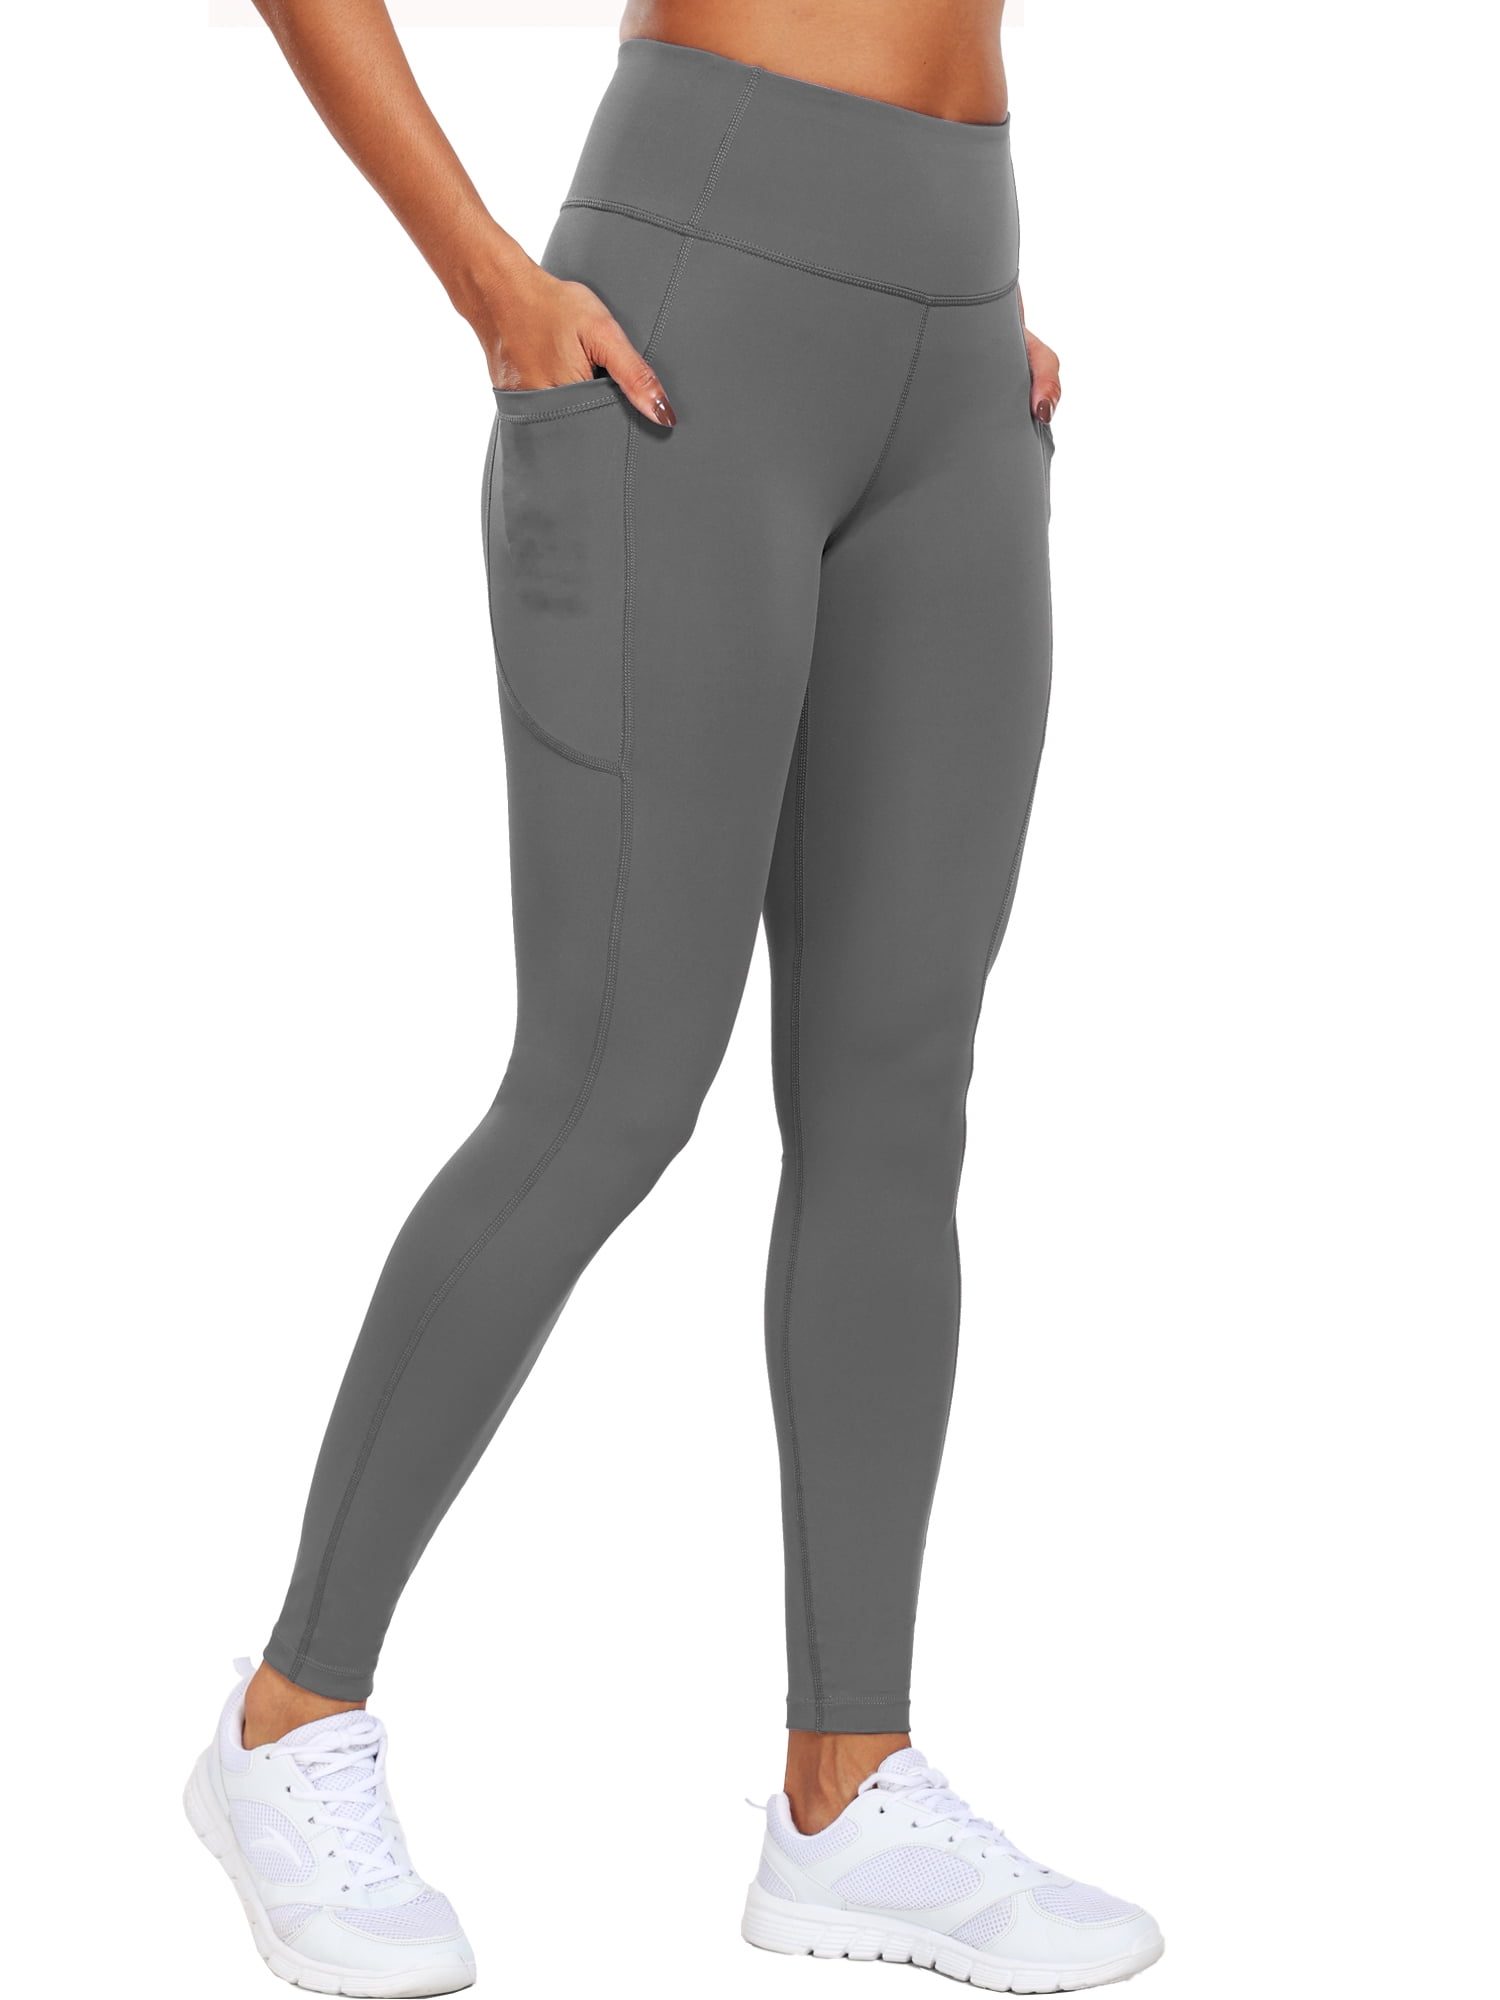 B91xZ Women's Plus Size Holiday Leggings High Waist Ankle Leggings with Side  Pockets,XXL Gray 